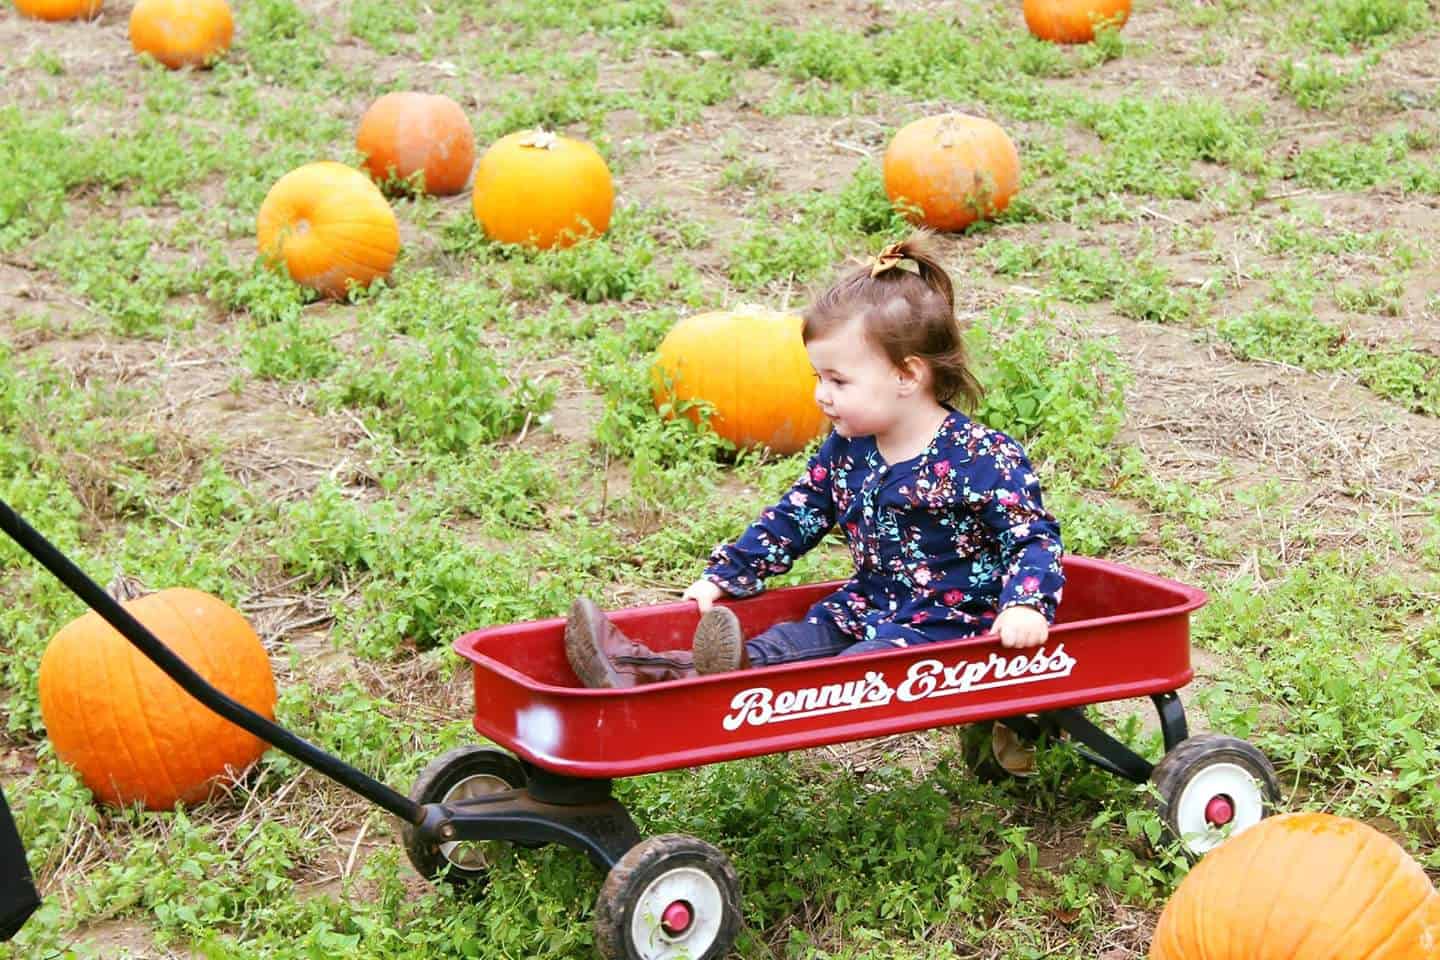 Toddler girl in red wagon at pumpkin patch.